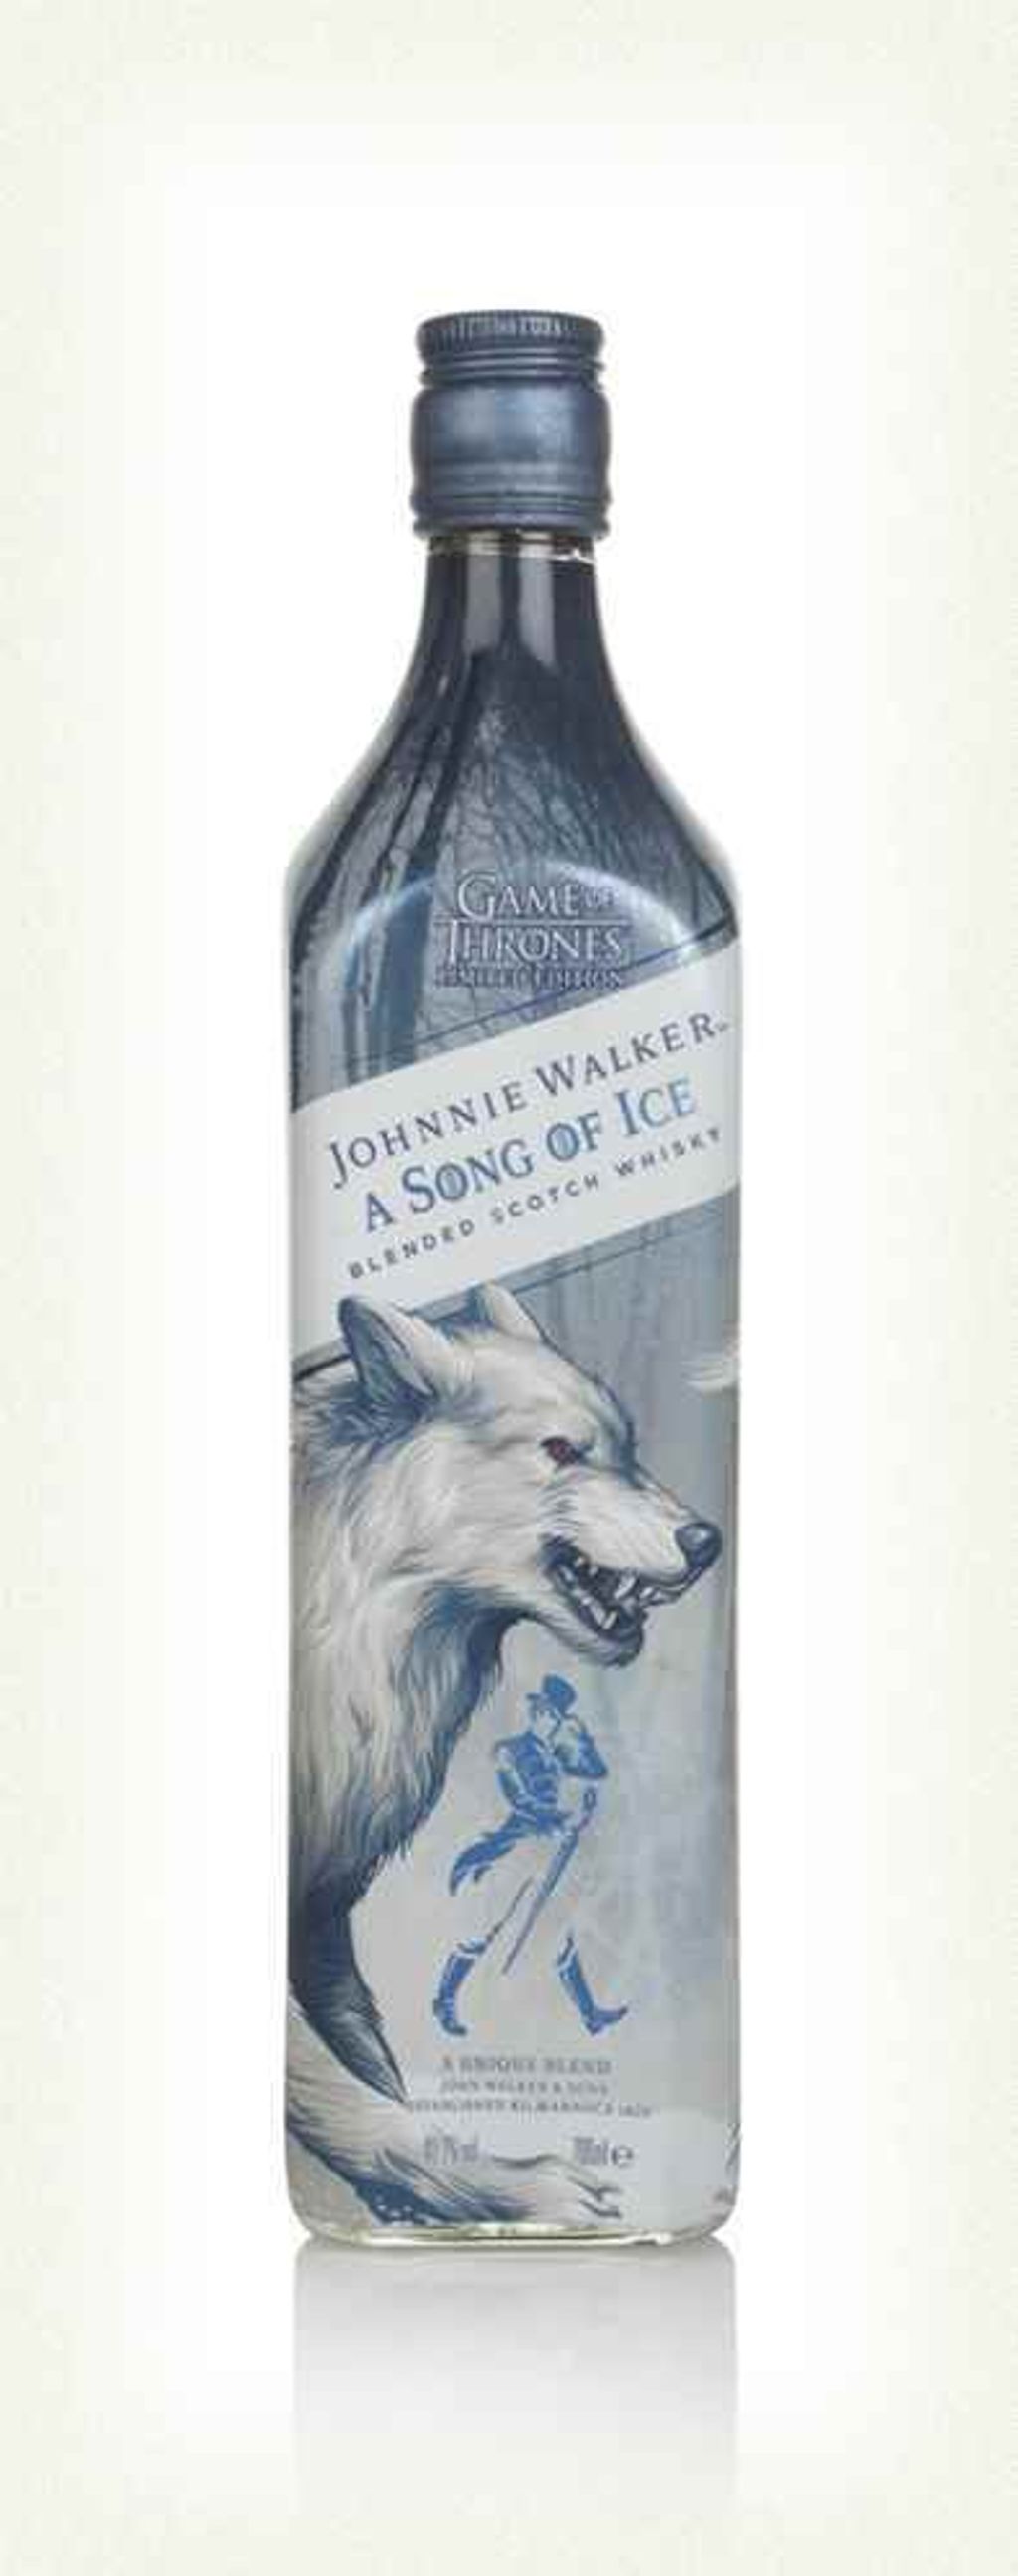 johnnie-walker-a-song-of-ice-whisky.jpg